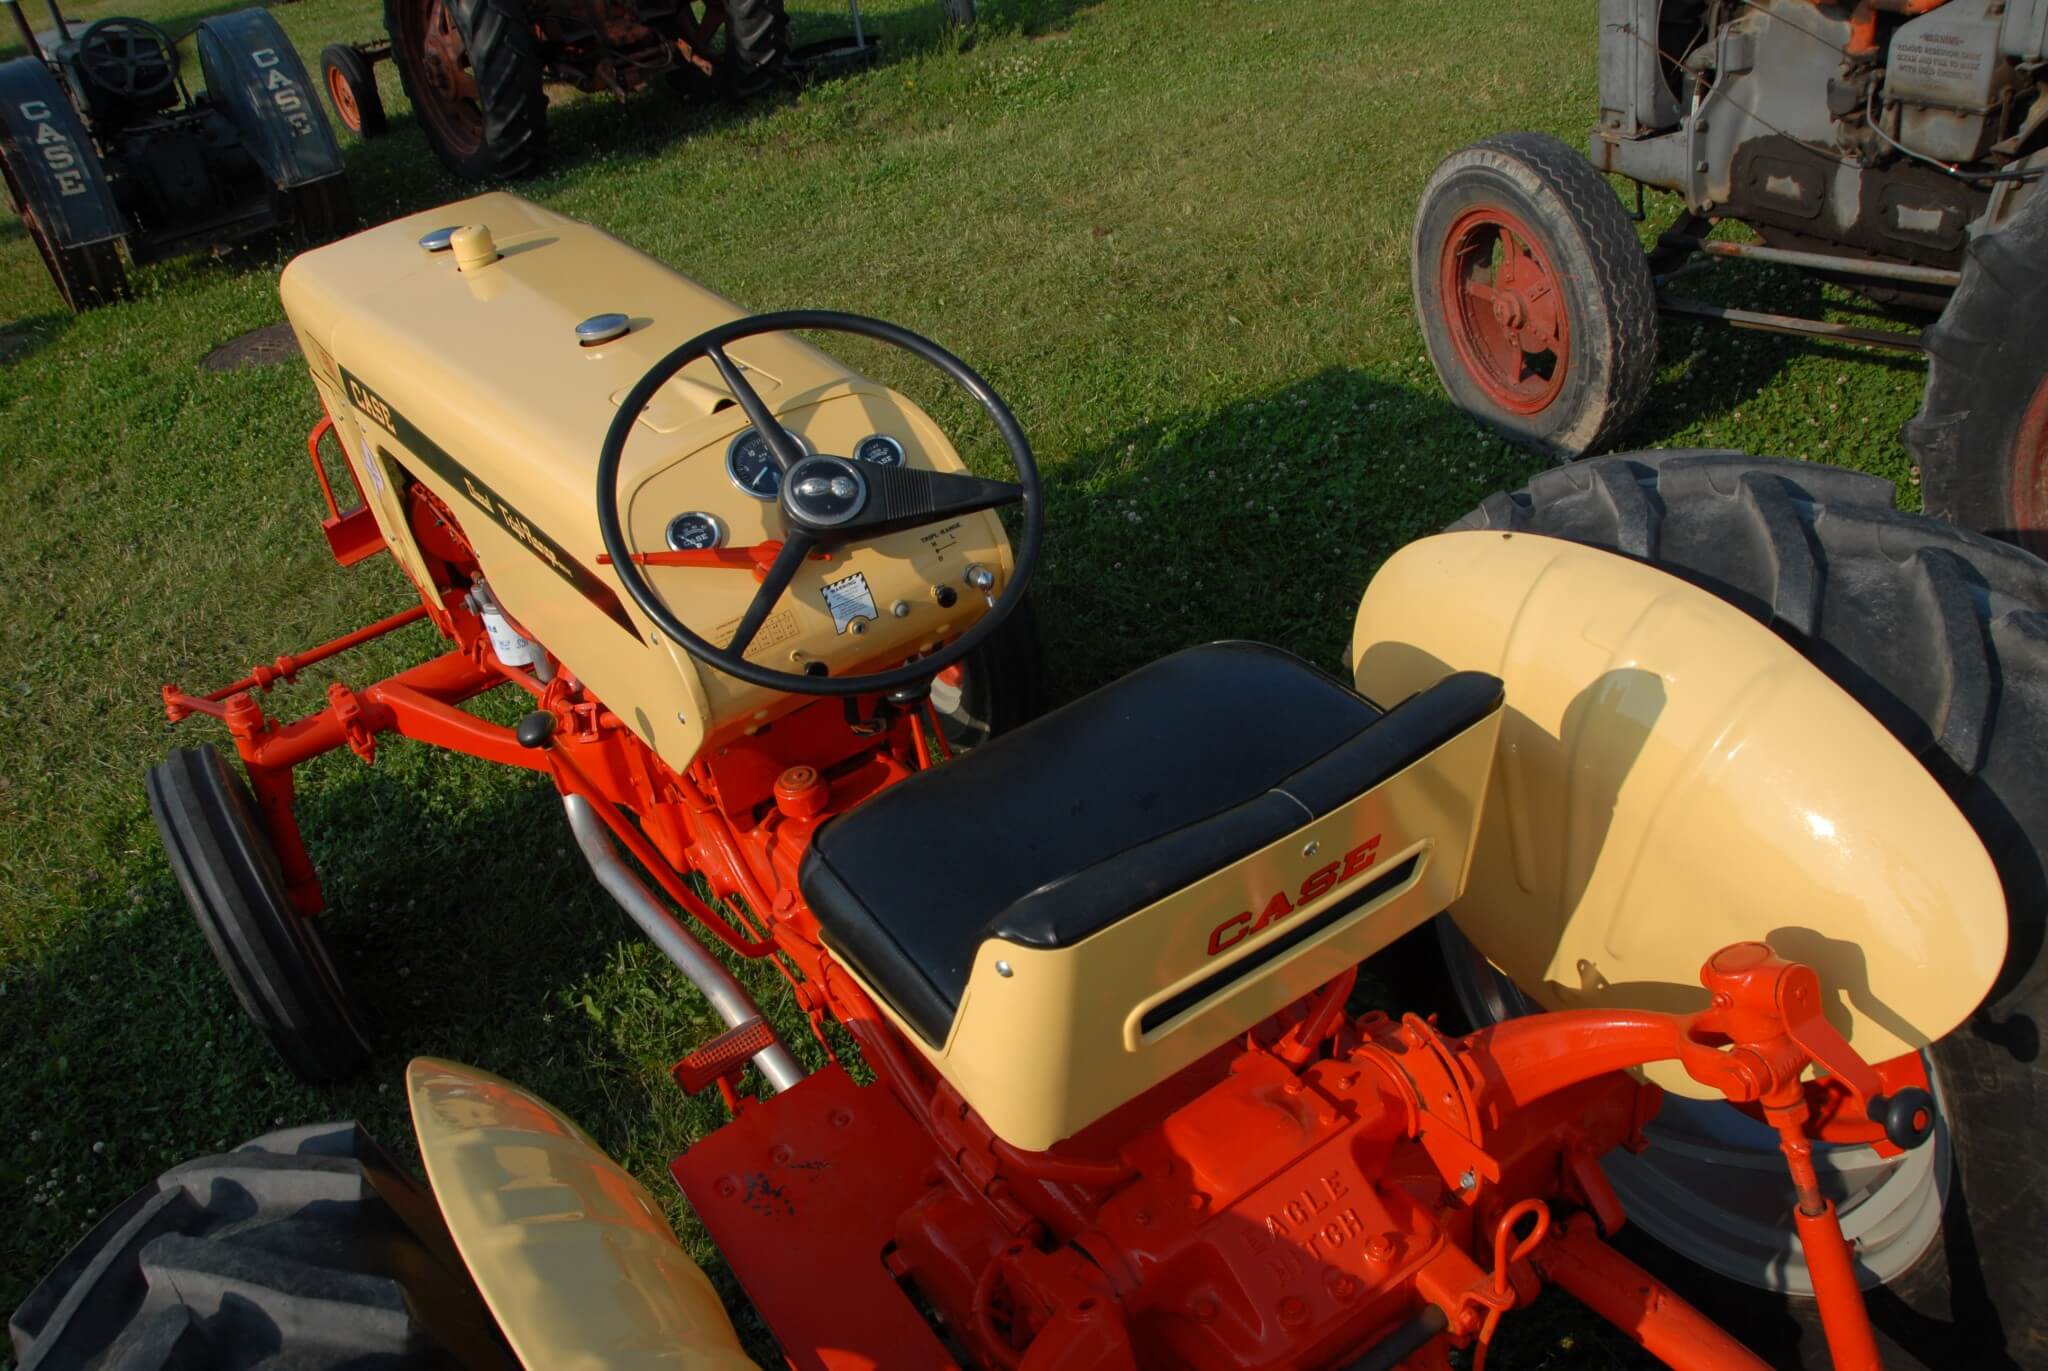 There was nothing particularly impressive about the 430's seating arrangement. The seat was a little better than most but without a substantial back. The controls were well positioned, though. Note the hand clutch, the long lever to the left of the steering wheel. In the rearward position, the transmission was disengaged but the PTO retained power flow. This enables the tractor to be stopped without interrupting power to PTO-driven implements.